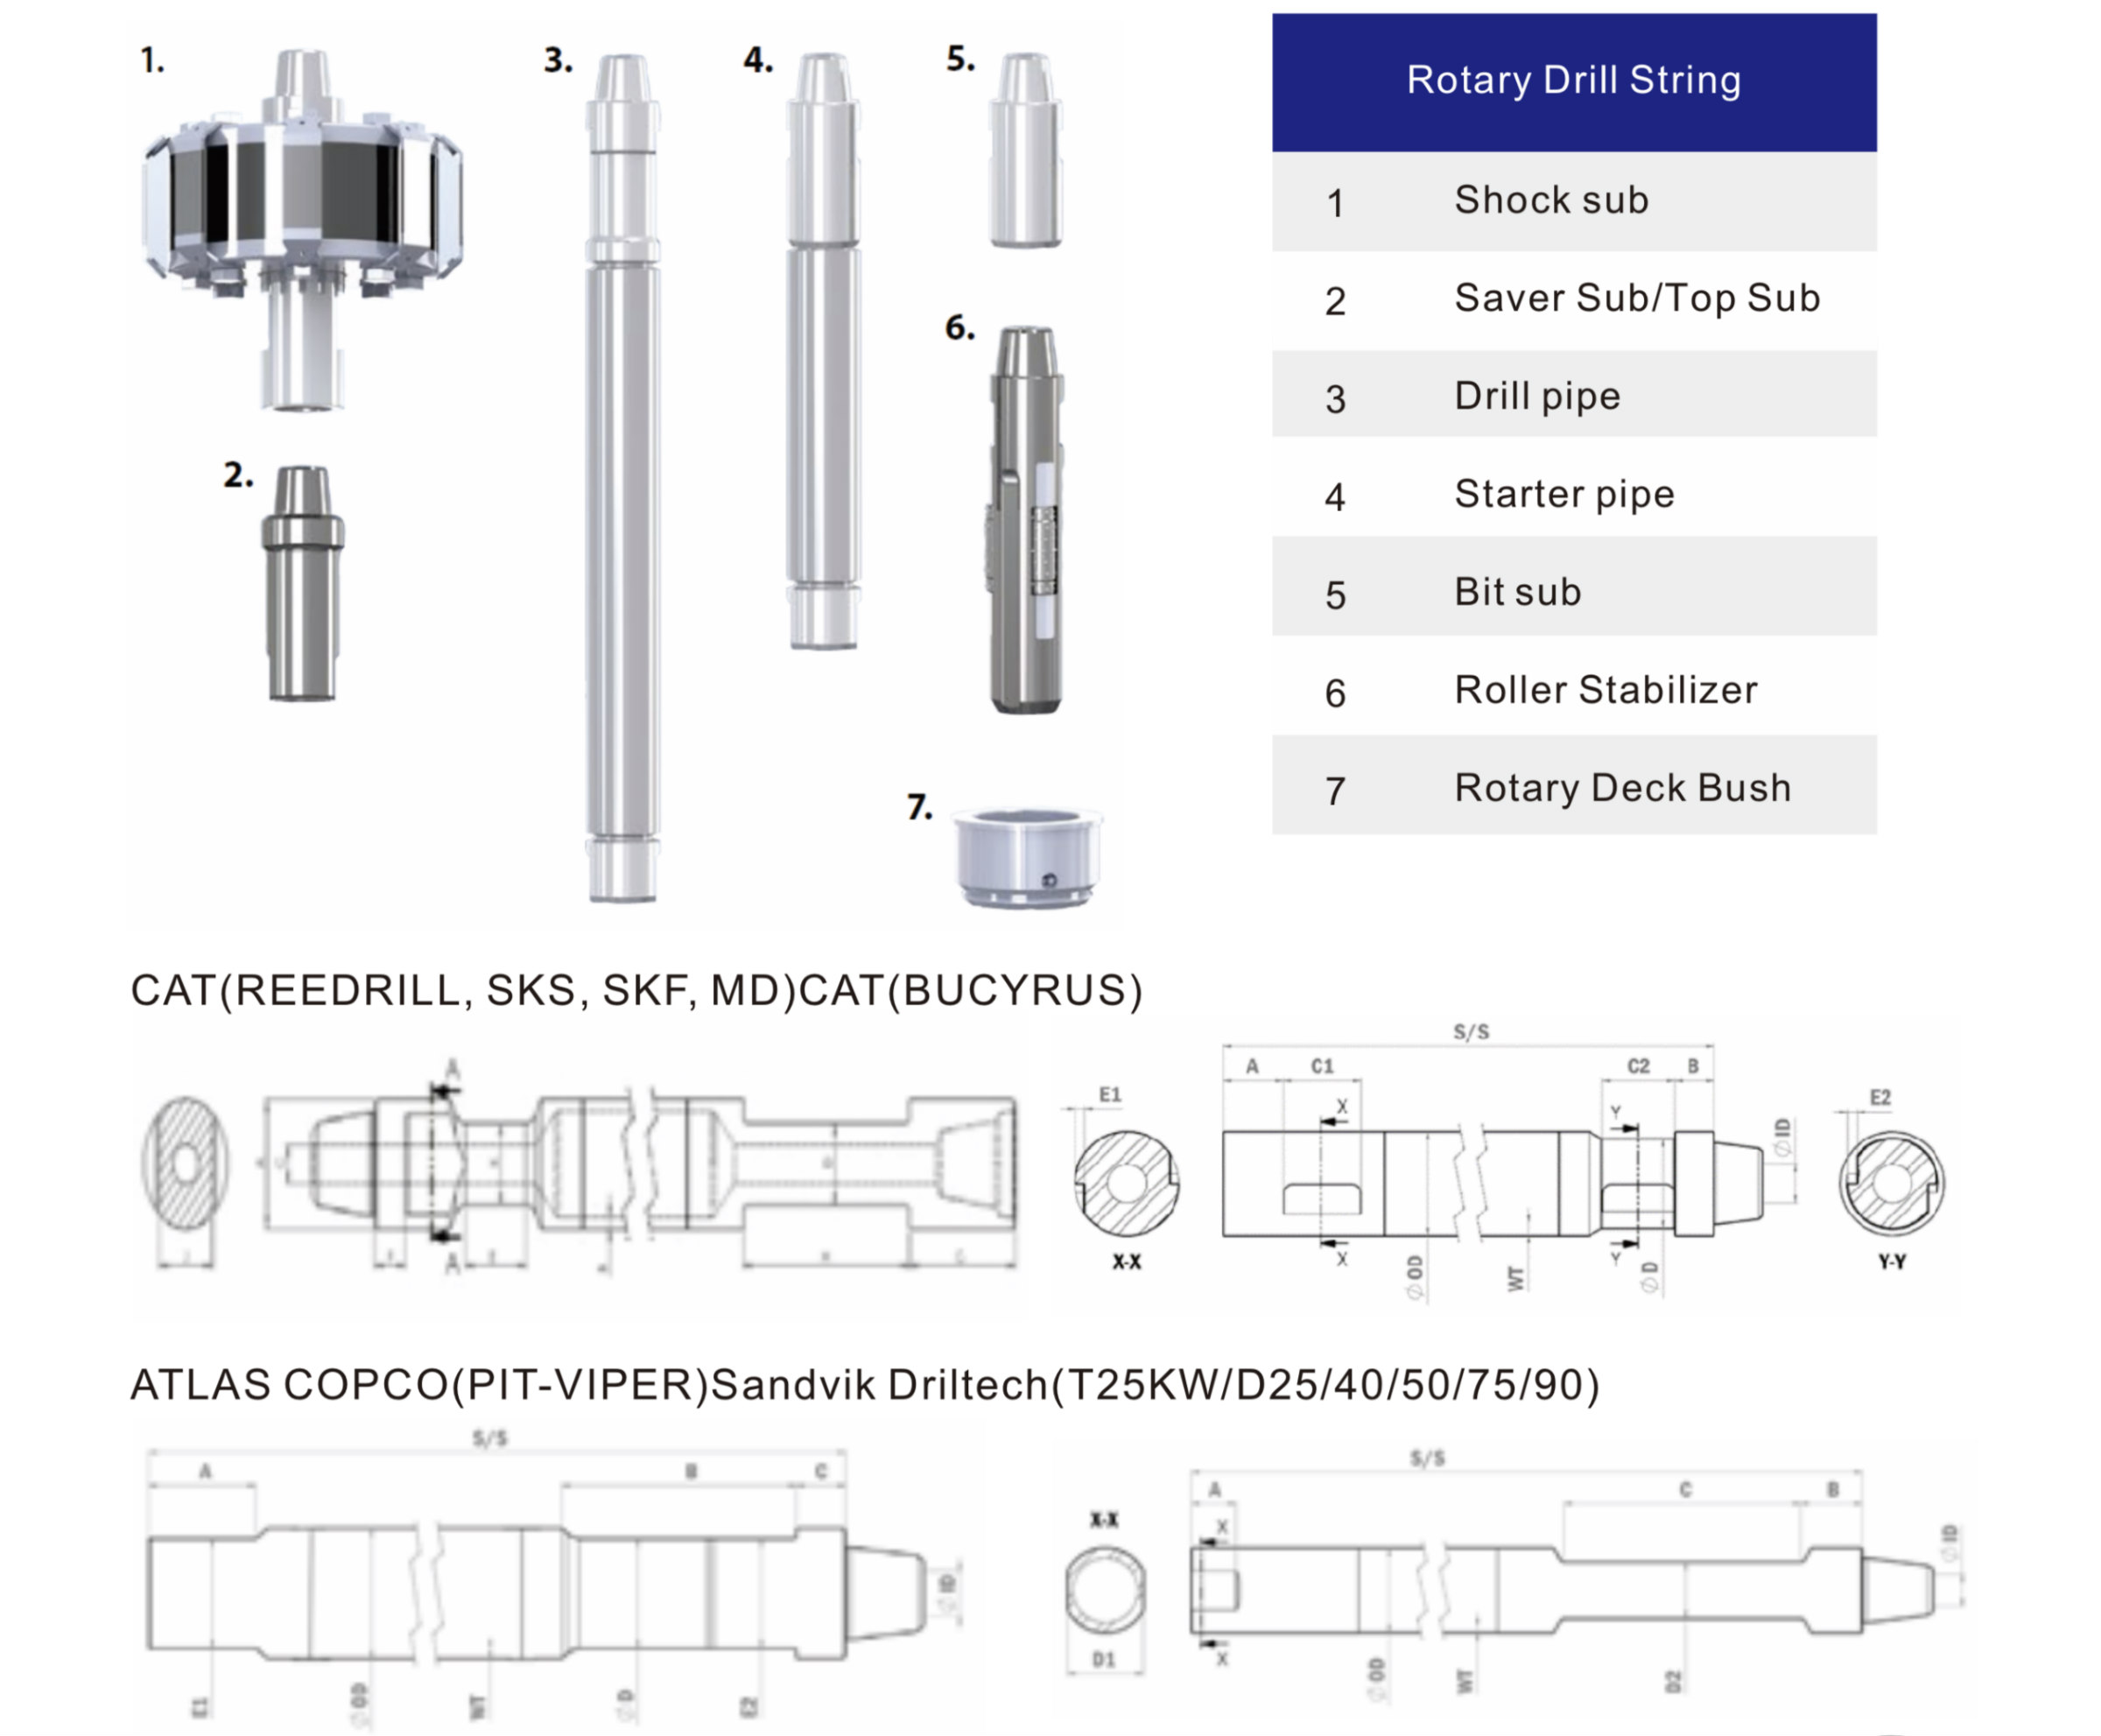 Black Diamond Drilling Rotary Drill String schematic parts list and technical data